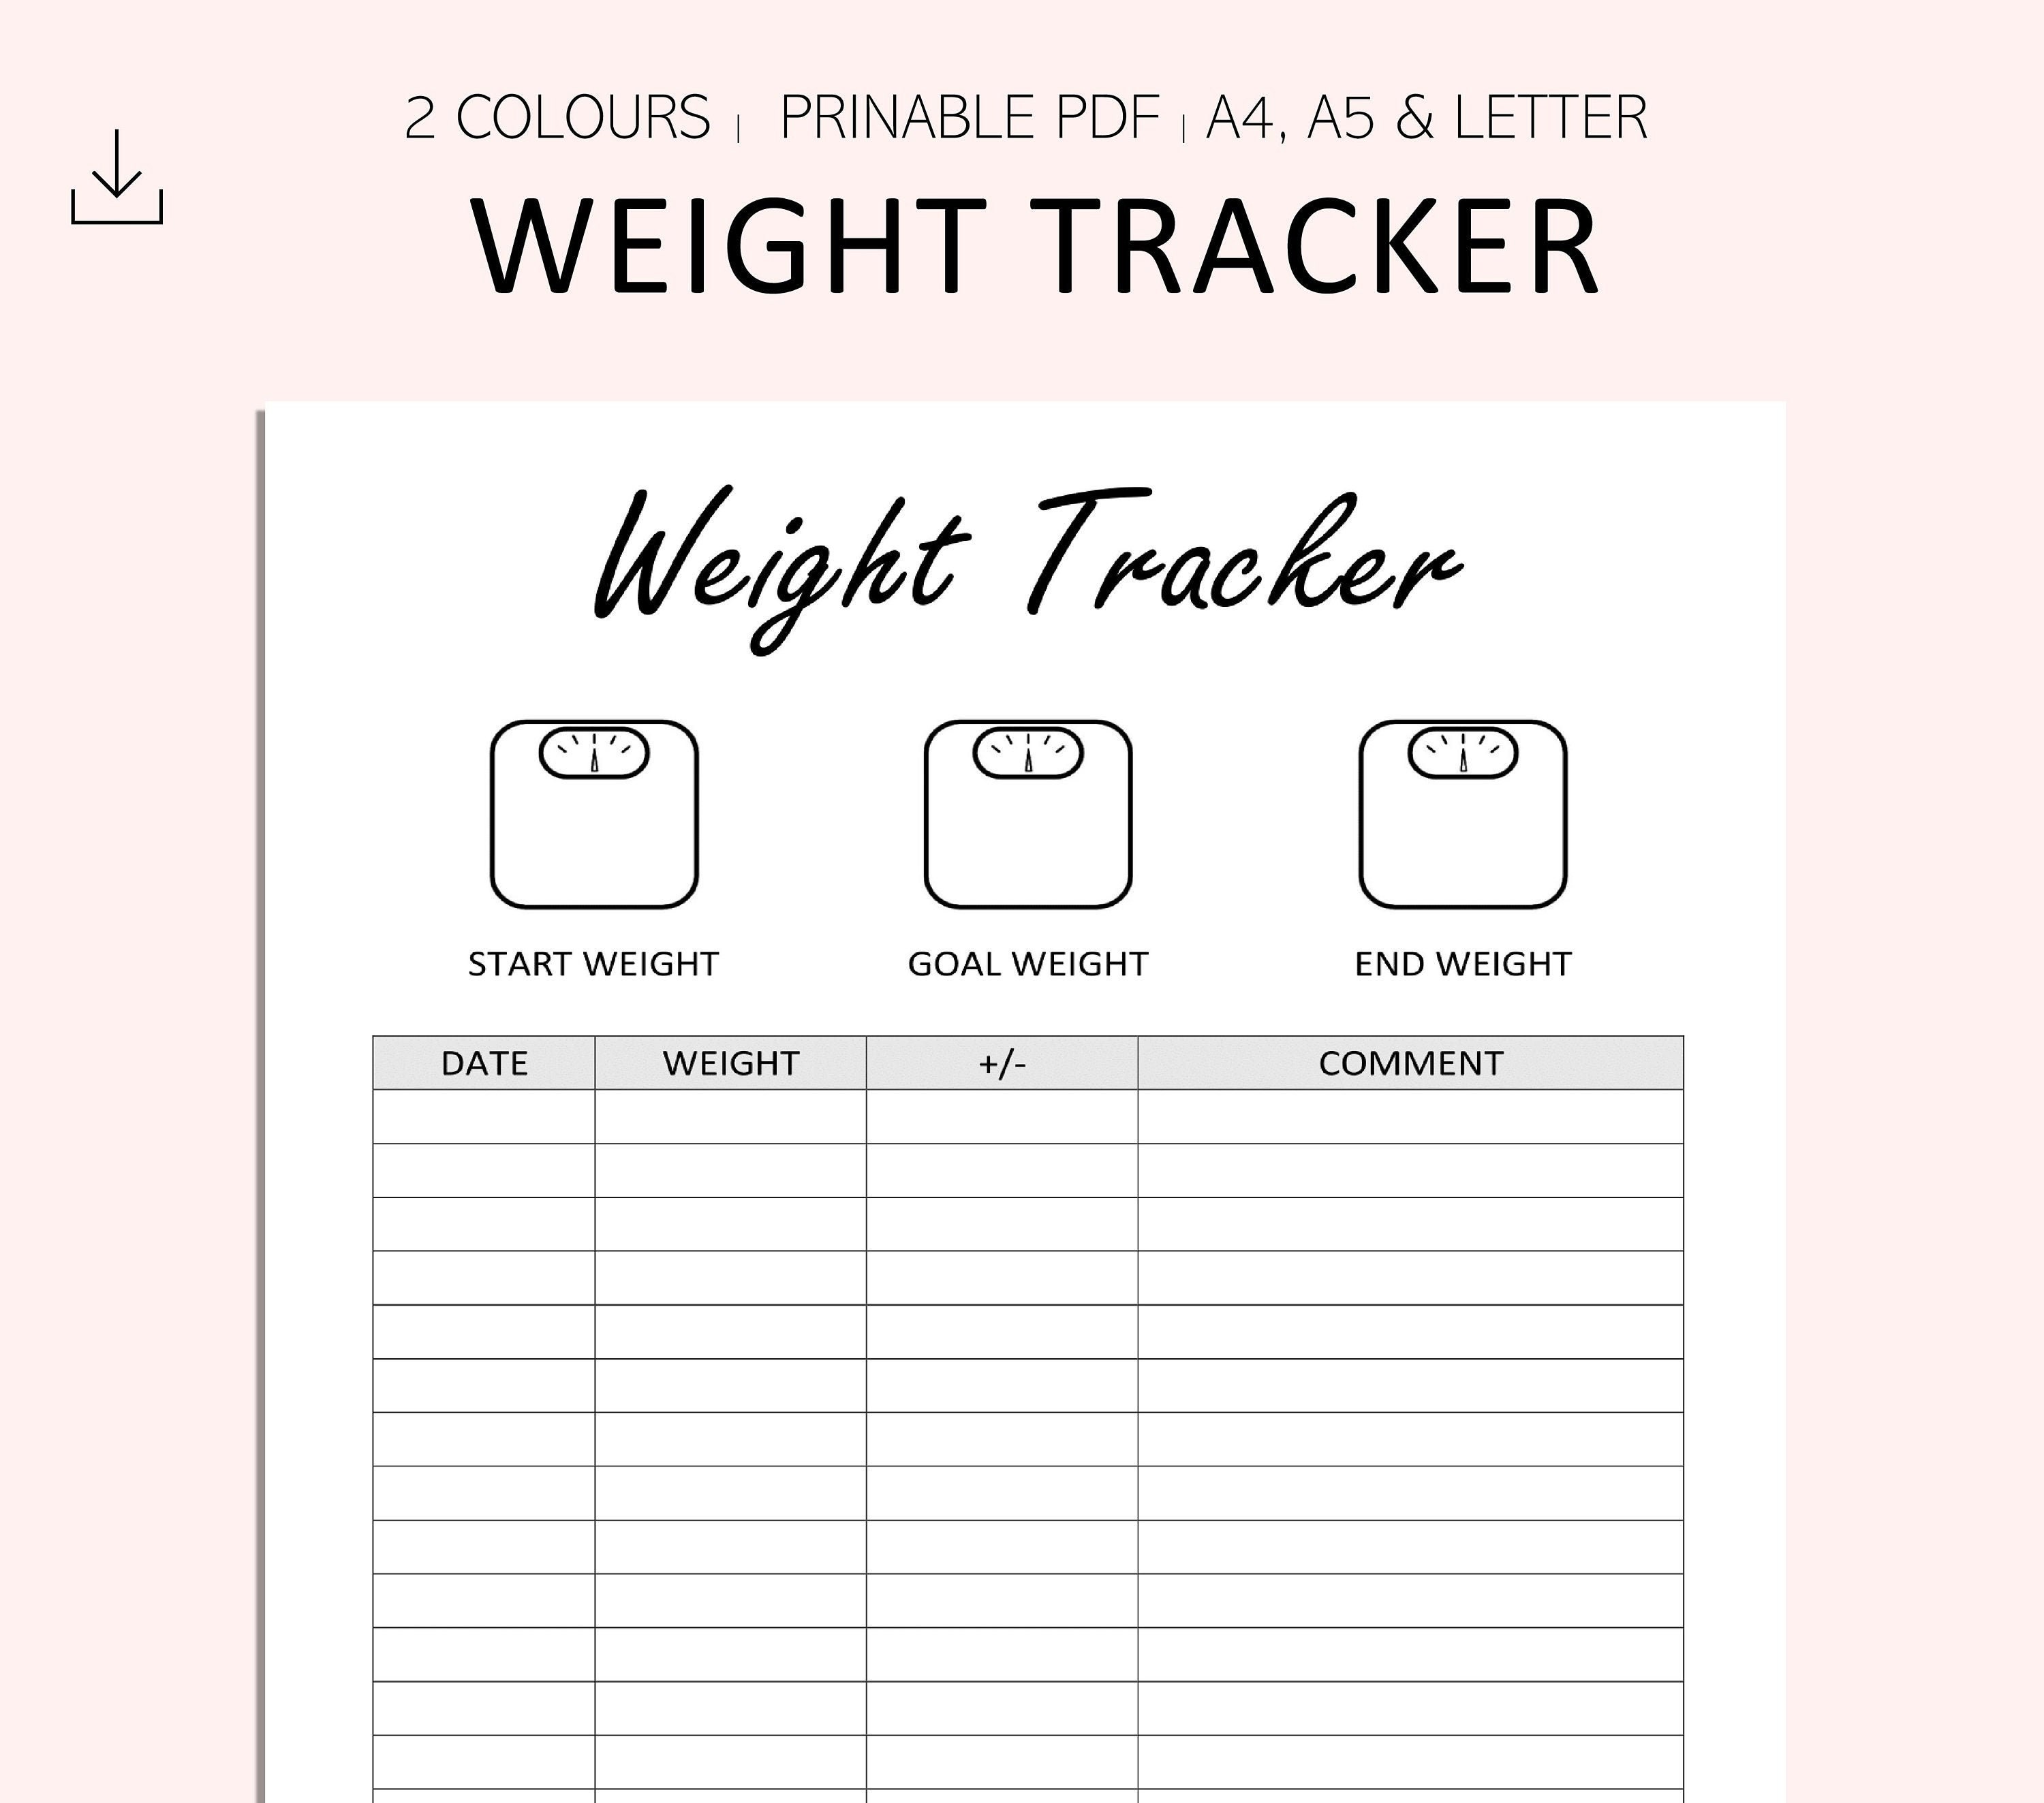 Weight Tracker Weight Log Weight Loss Journey Weight Recorder A4 A5 LETTER  PDF (Instant Download) 